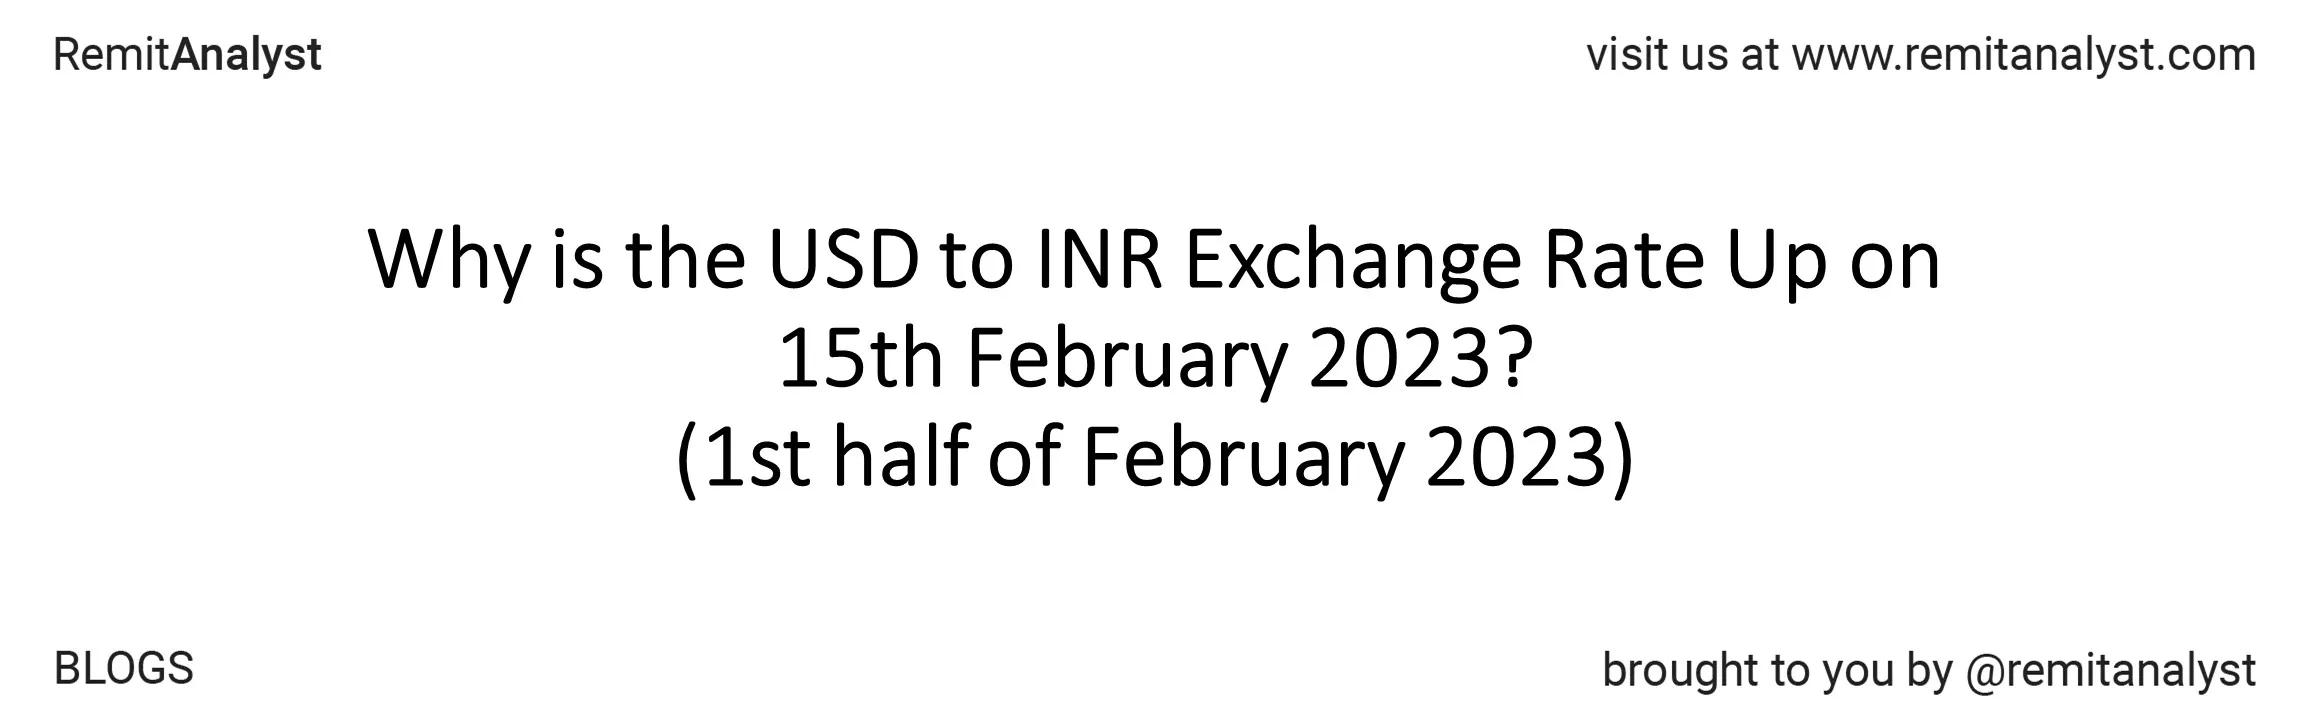 usd-to-inr-exchange-rate-1-feb-2023-to-15-feb-2023-title